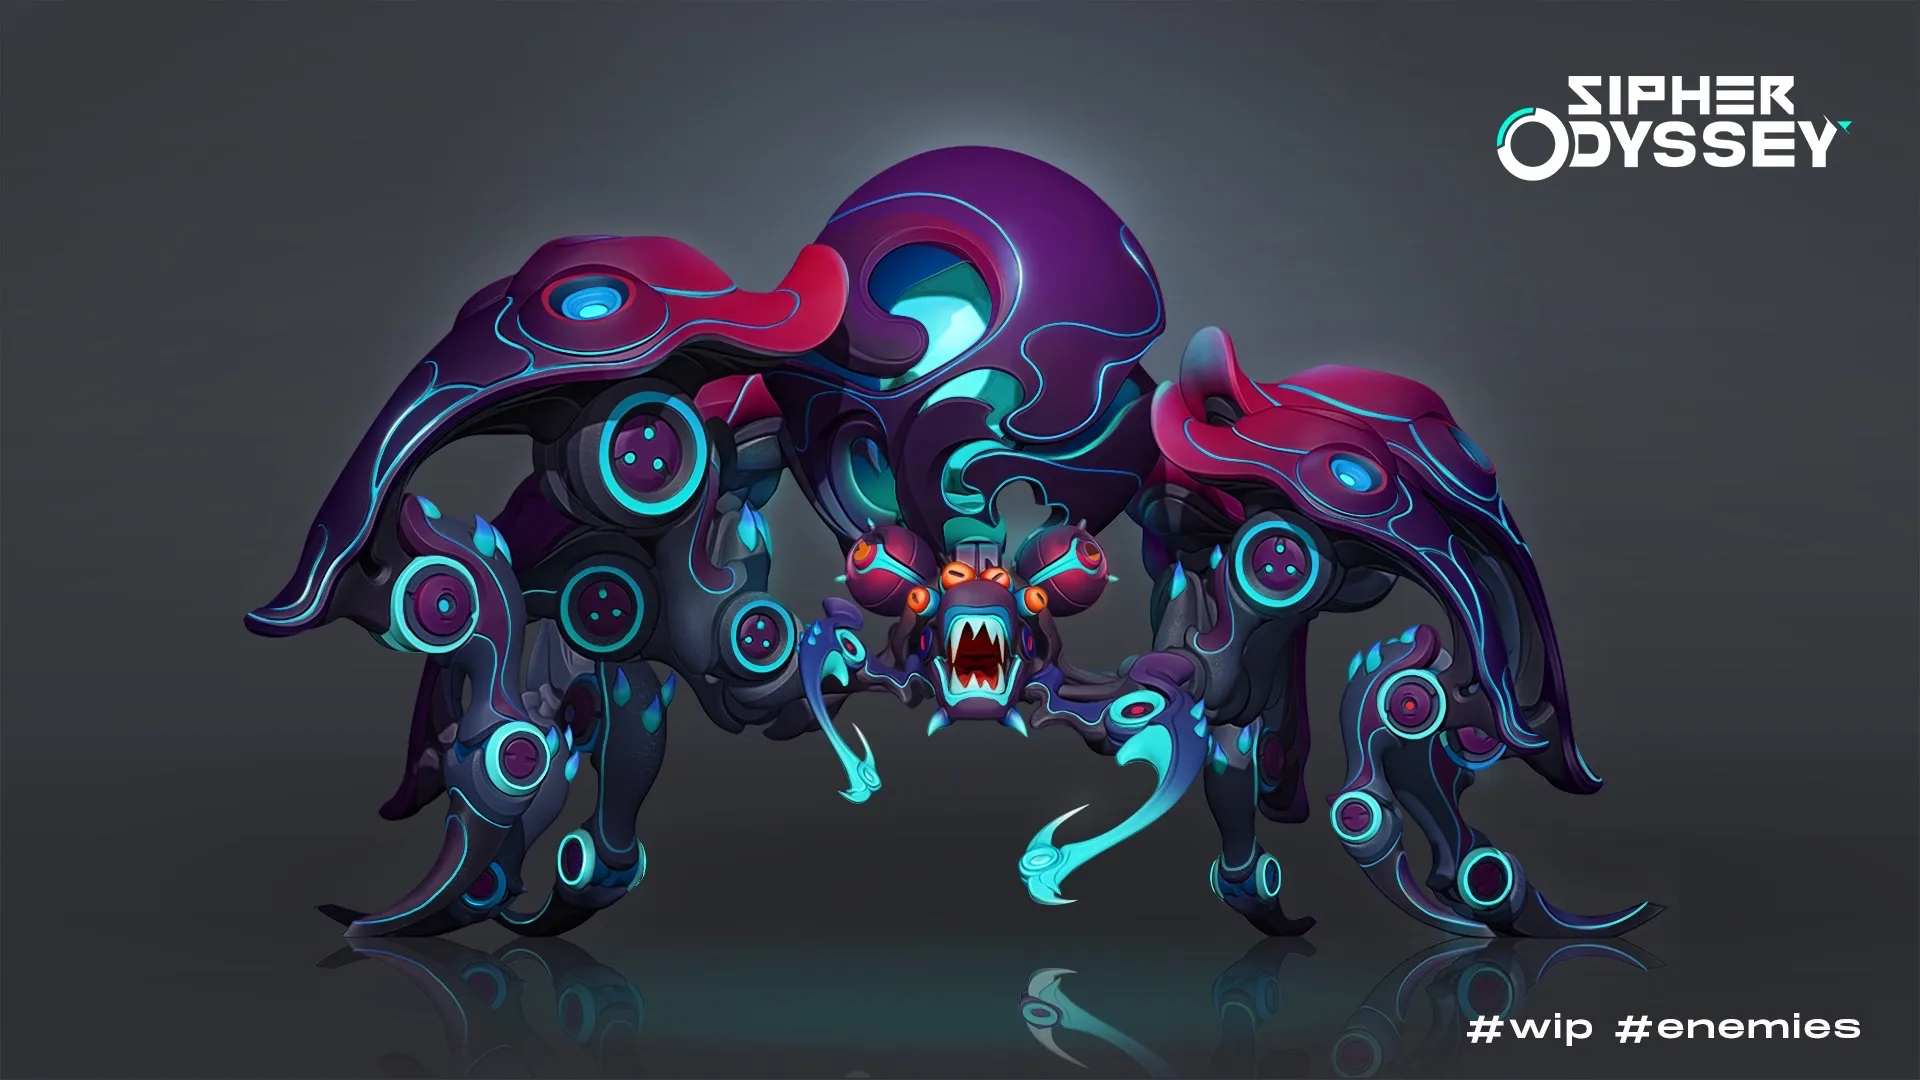 Sipher concept art of a spider-like enemy boss. Sipher is a casual fighting and exploration game with live-action MOBA controls and roguelike features.